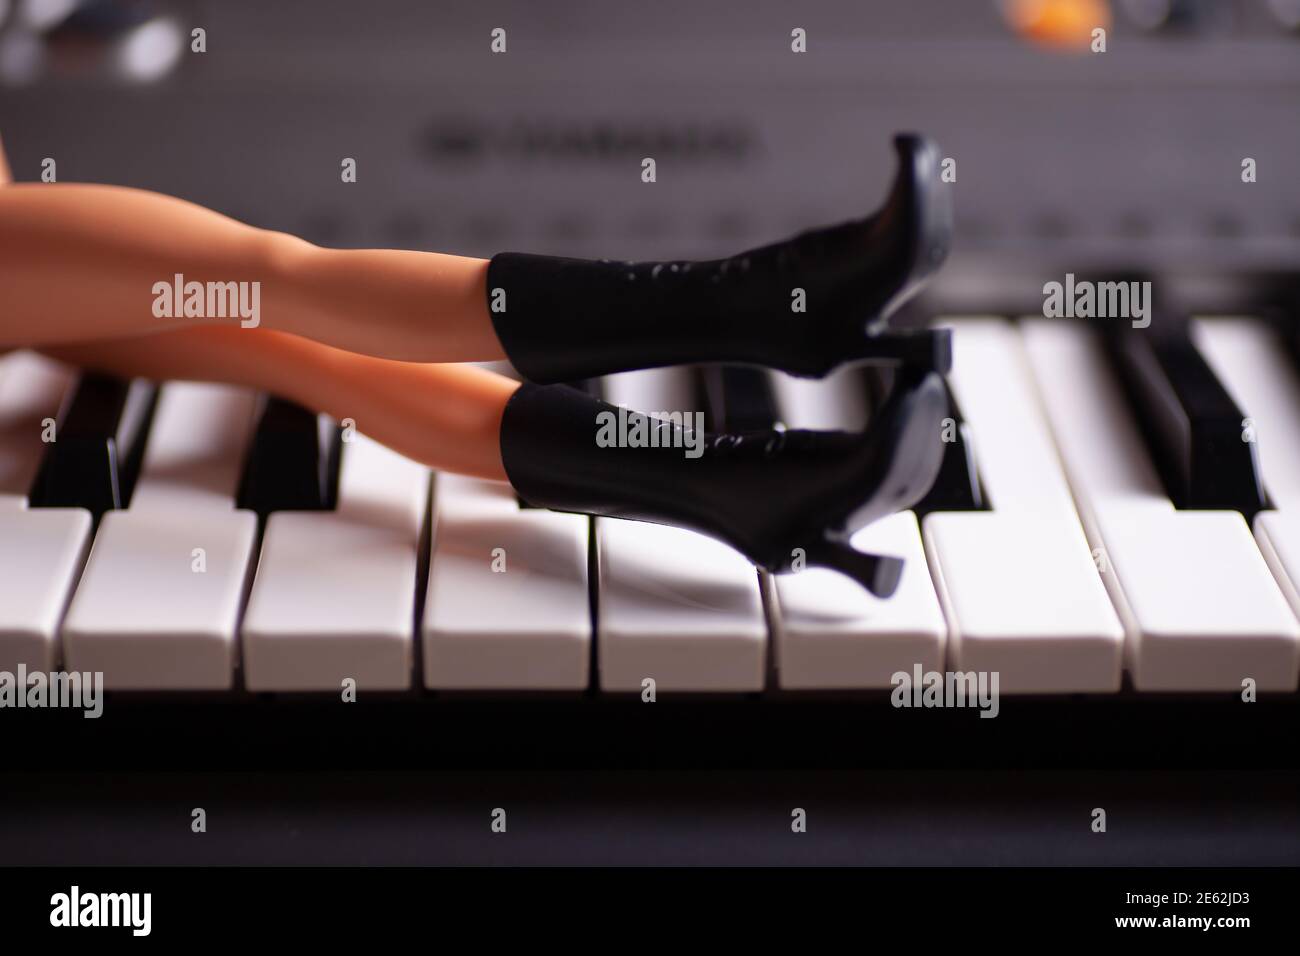 Close-up slim plastic legs in black toy rubber boots with high heels lie on piano keys Stock Photo